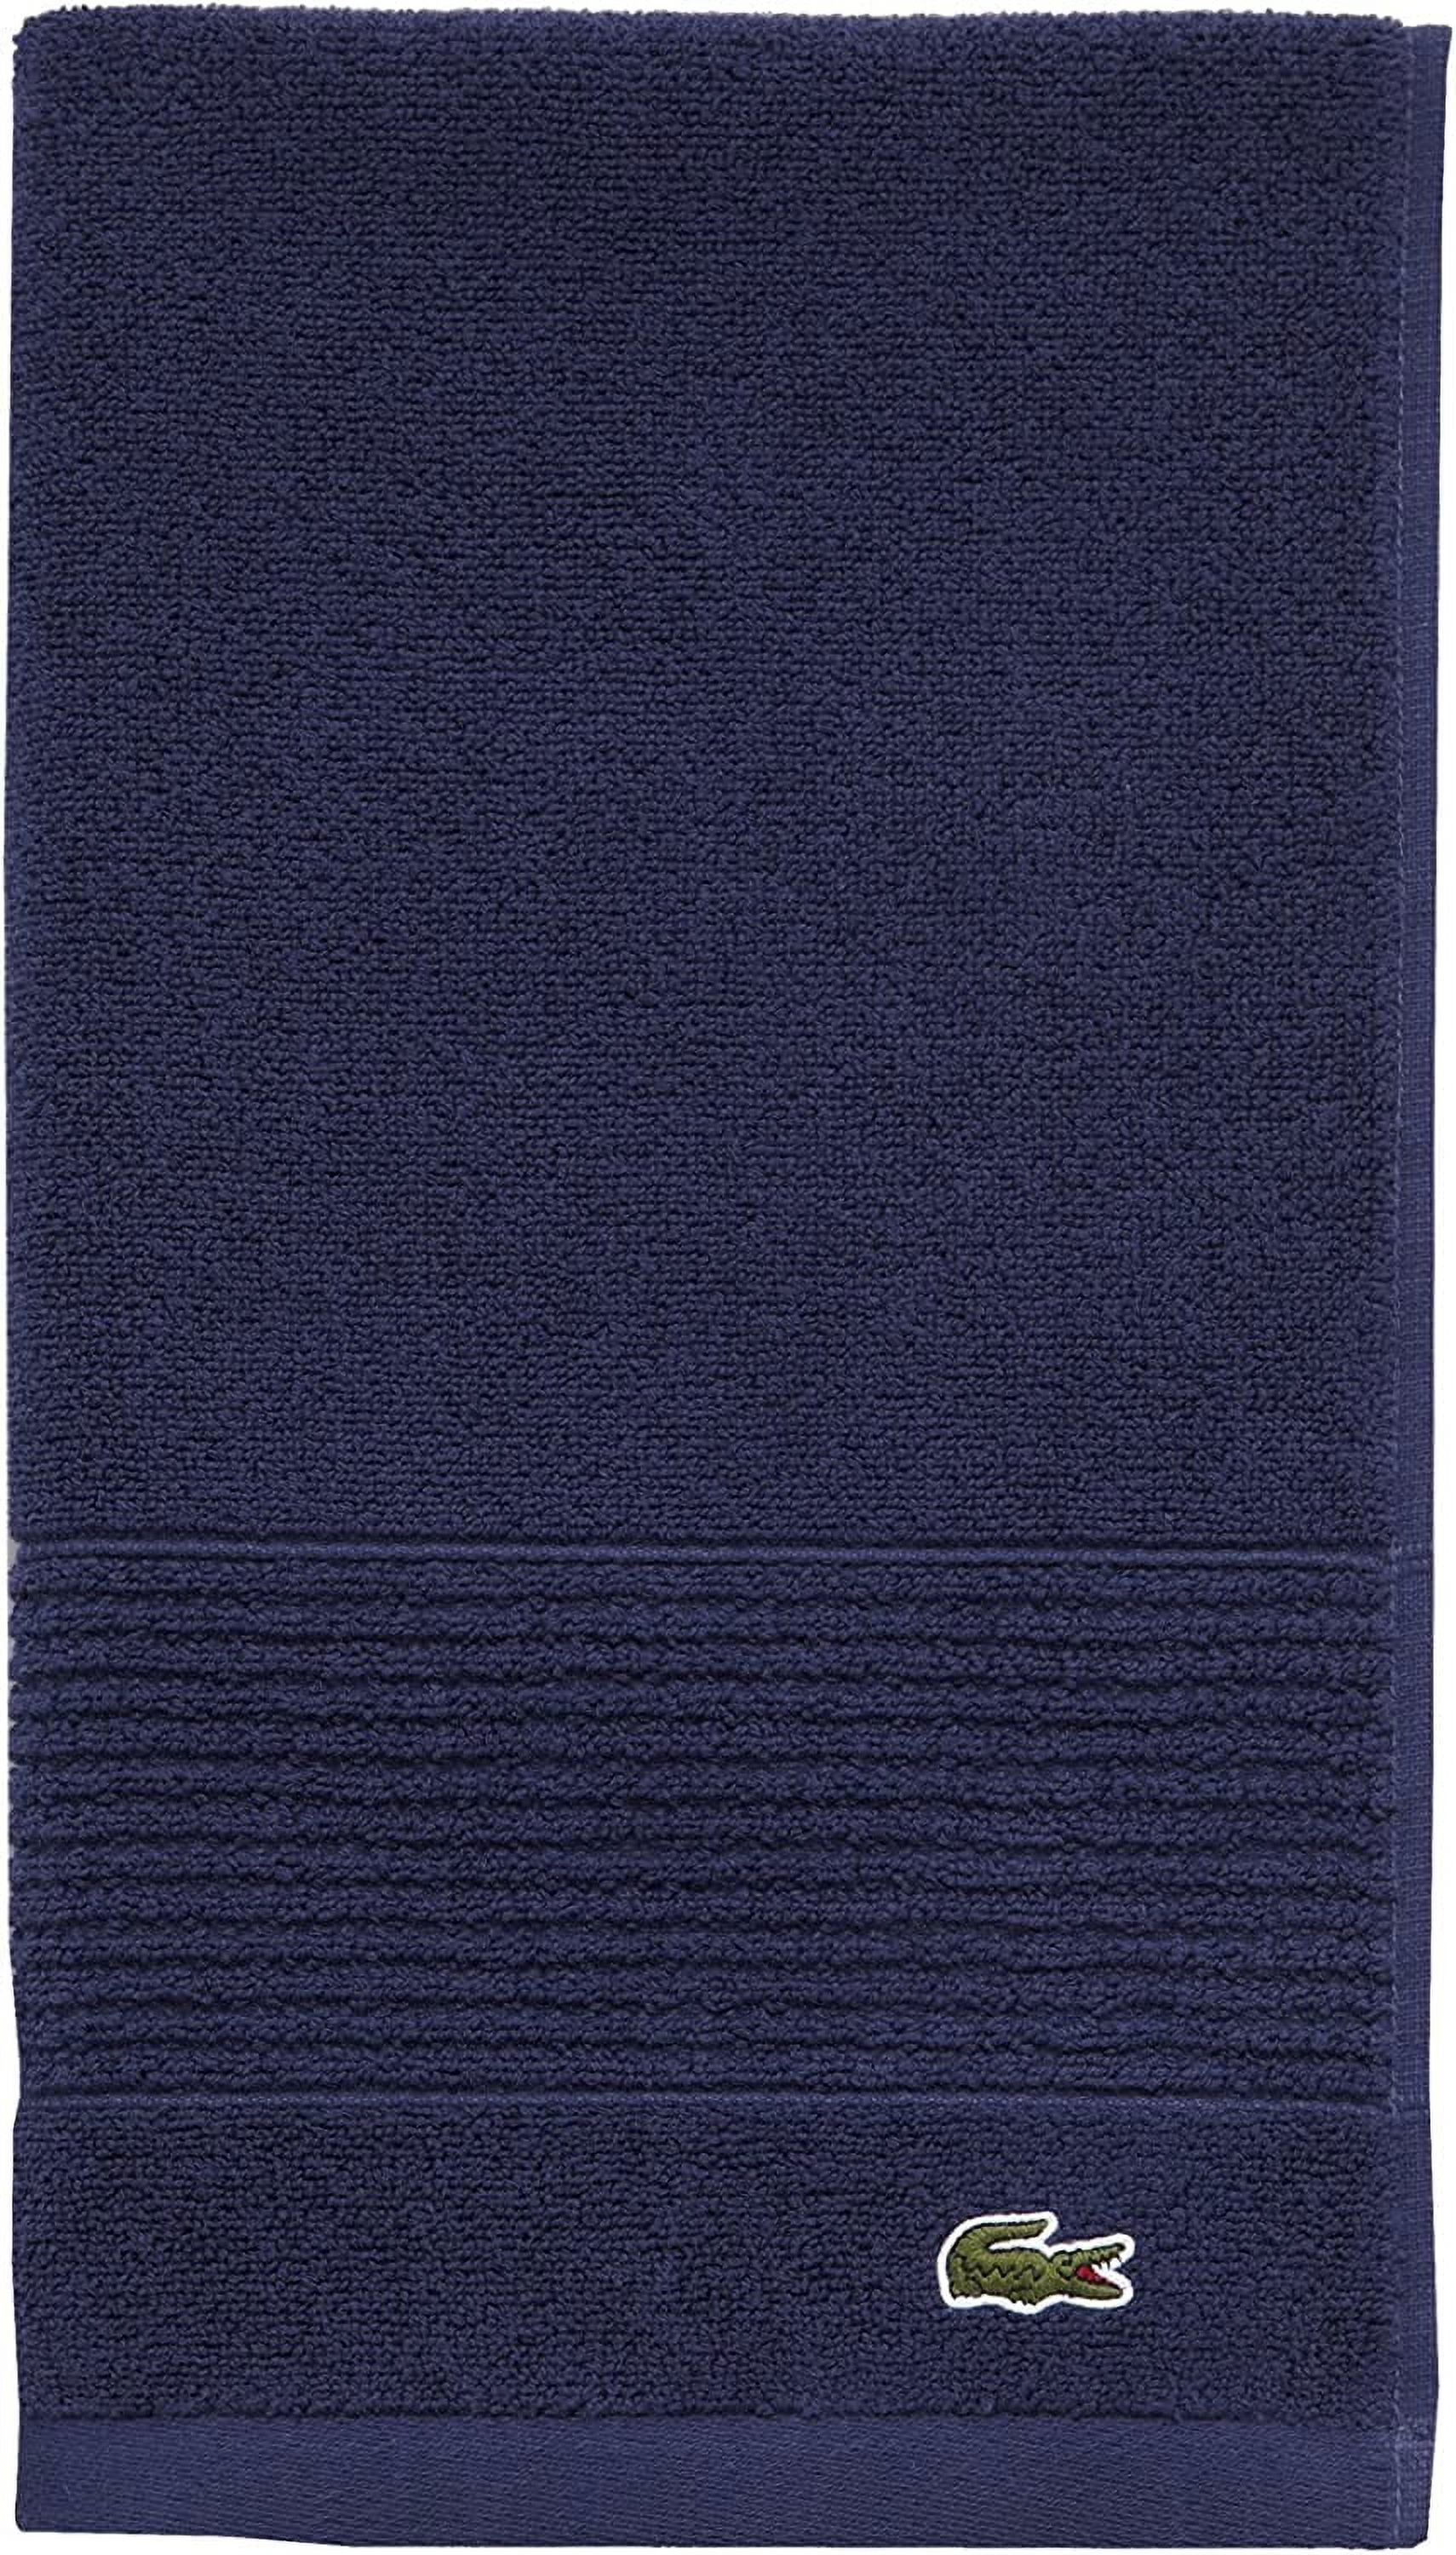 Hand Towels by Lacoste − Now: Shop at $7.99+